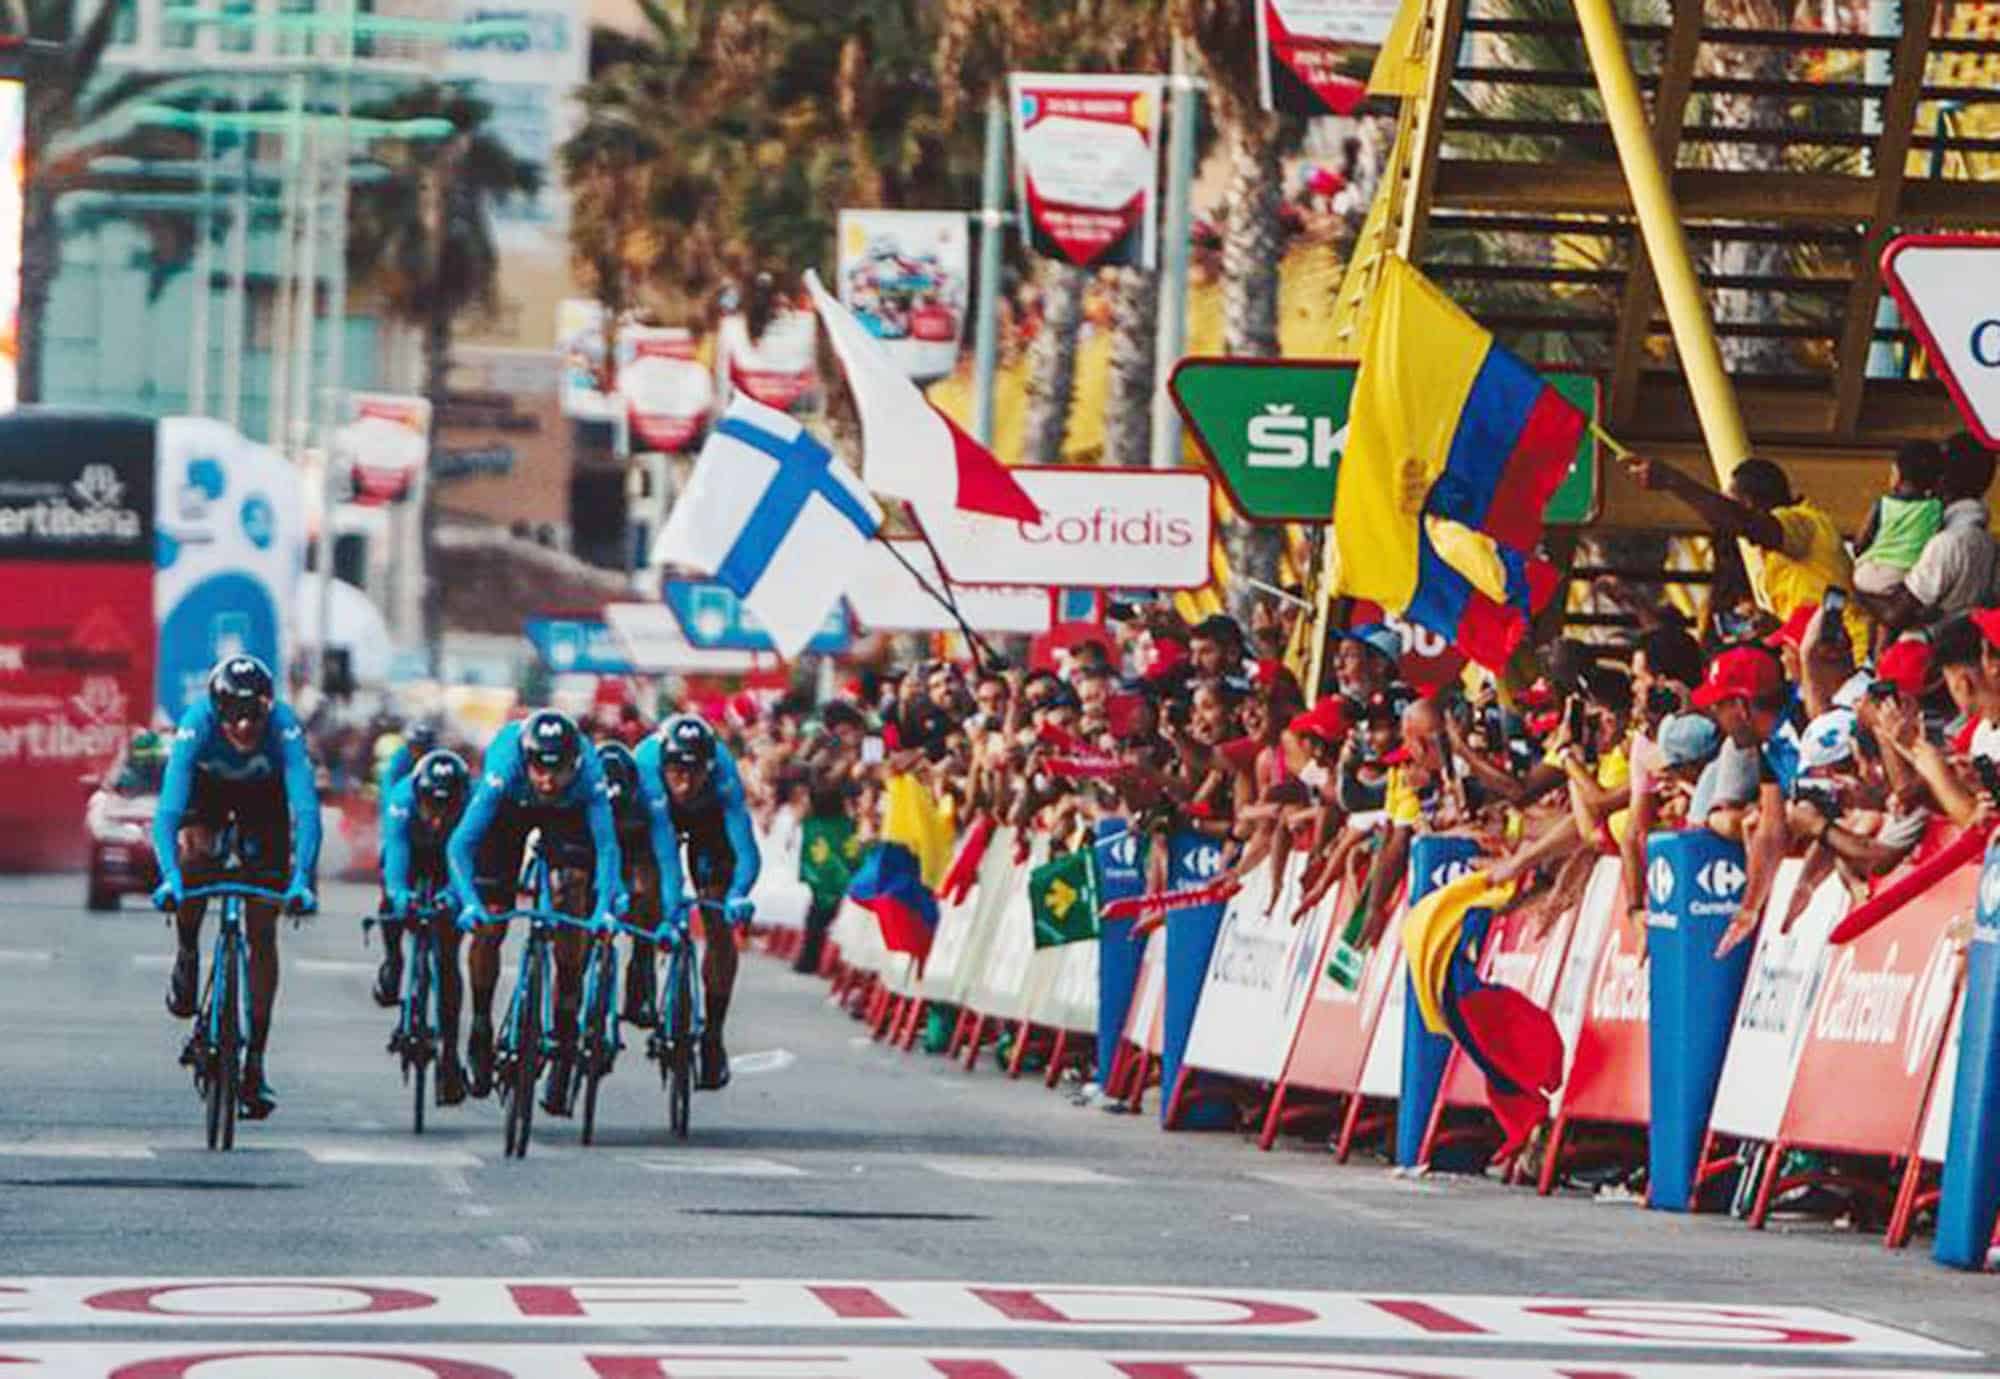 Columbia’s Miguel Angel Lopez became the first rider to claim the leader's red jersey at La Vuelta 19 after his Astana Pro Team dominated the opening team time trial on Saturday evening.